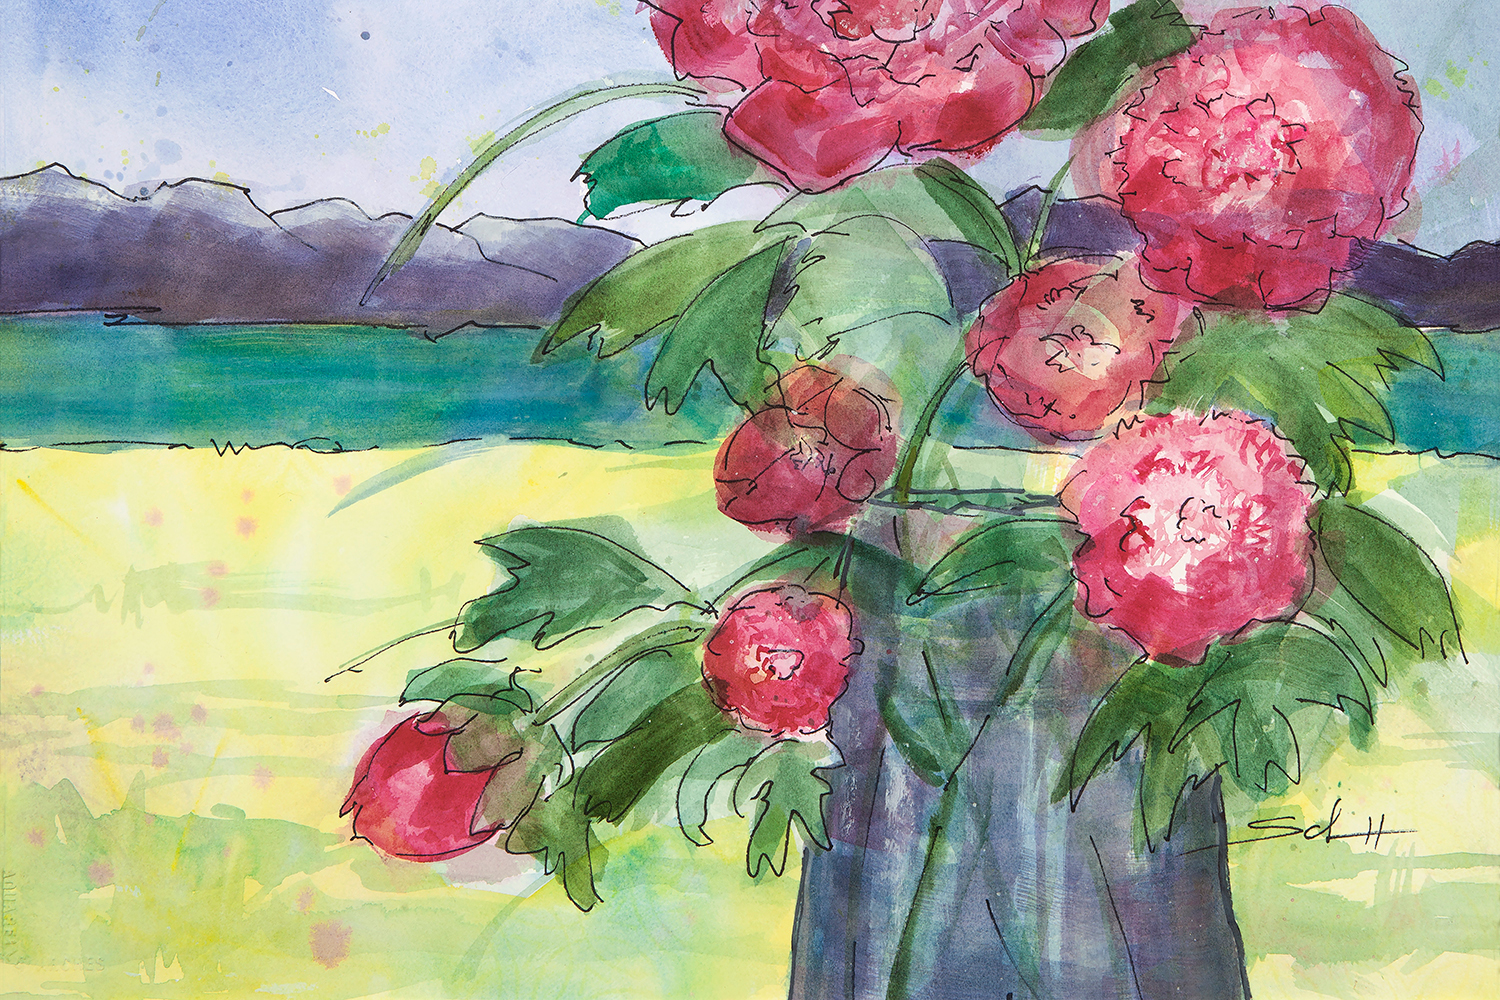 A pitcher of peonies dxggl3